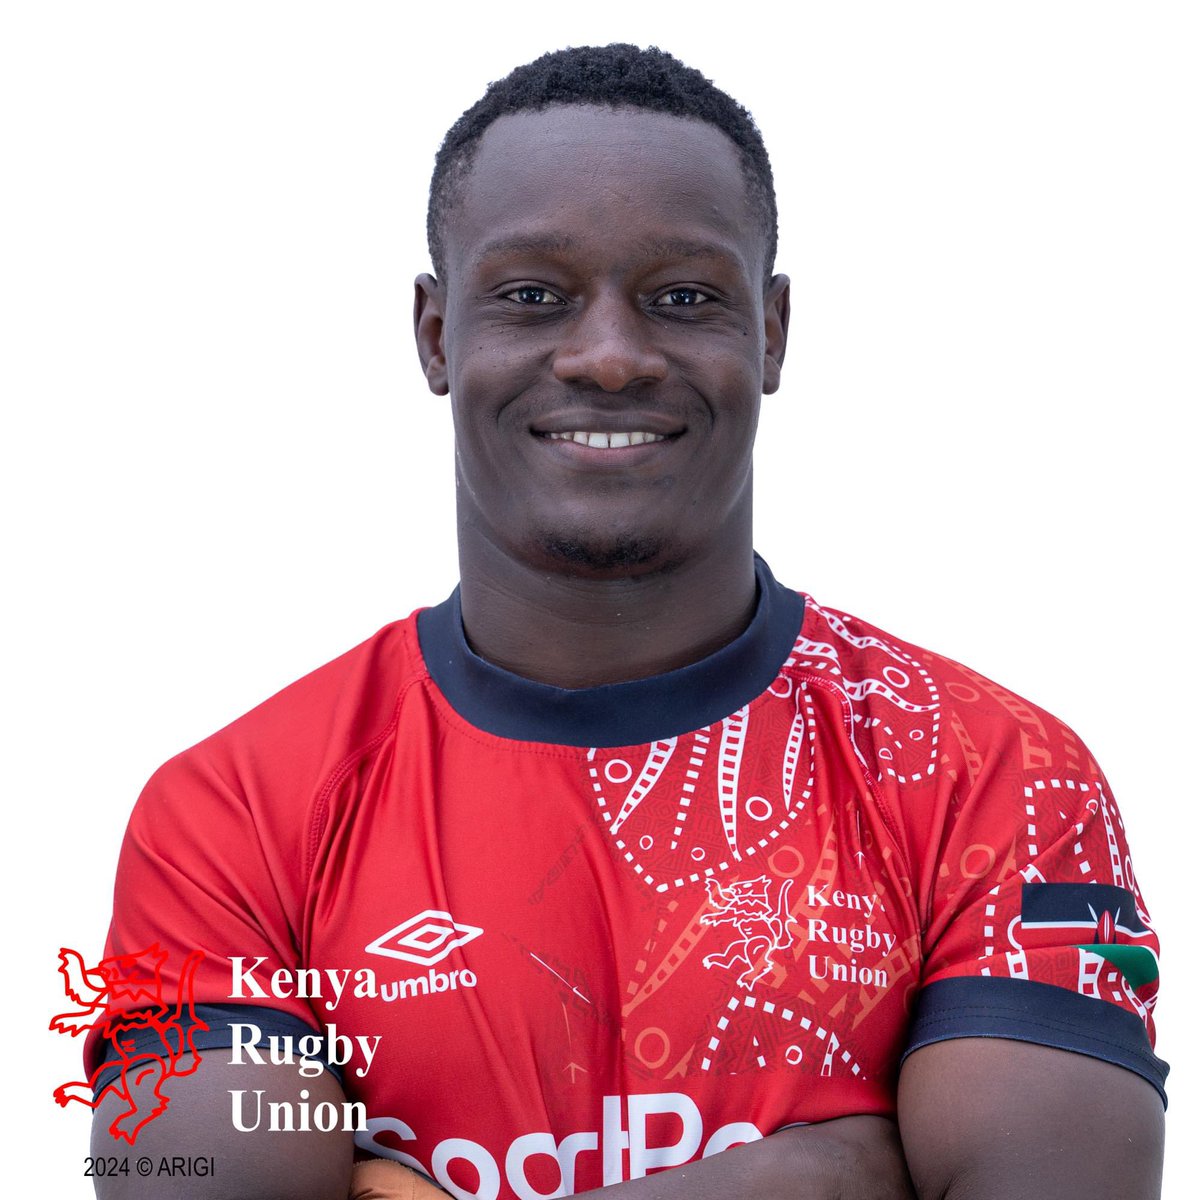 All the Best @salem_adoyo in your assignment… Enjoy Ja Yuwes!
#nondiesrugby #redtogether #rangers #montevideo7s #kenya7s